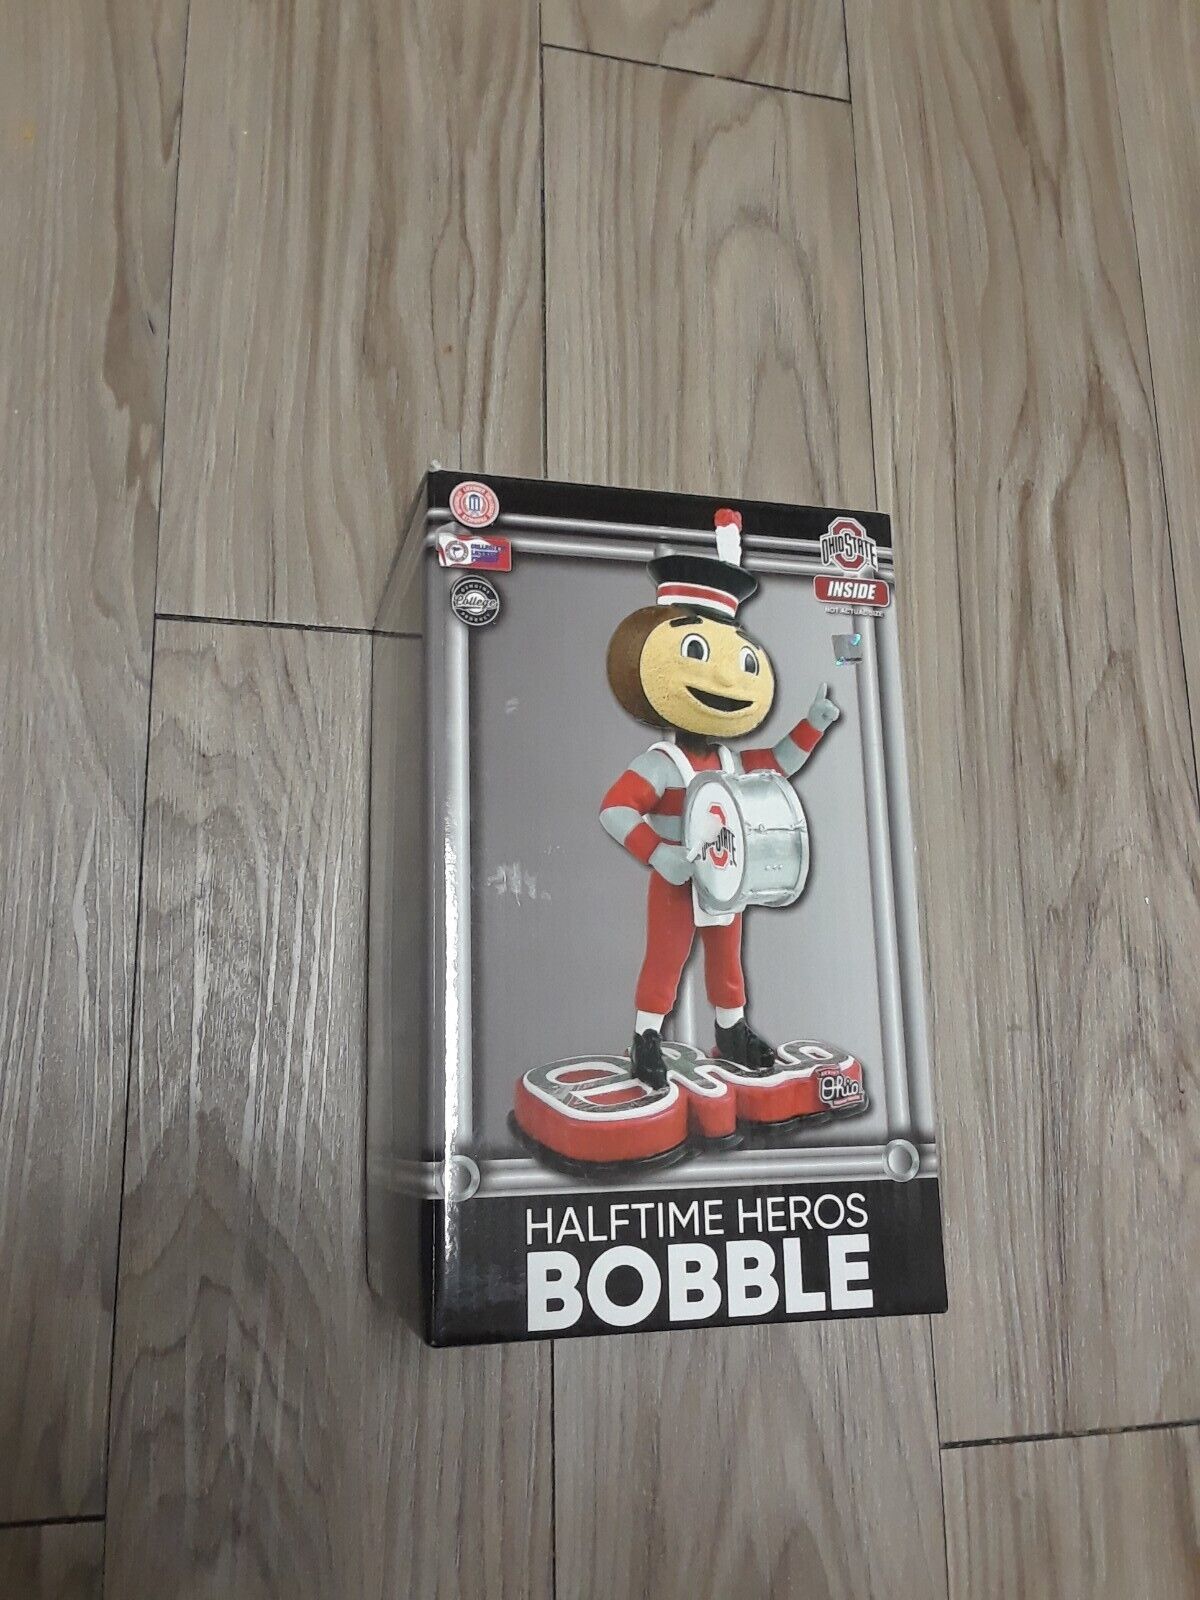 Brutus the Buckeye Ohio State Halftime Heroes Special Edition Bobblehead NCAA